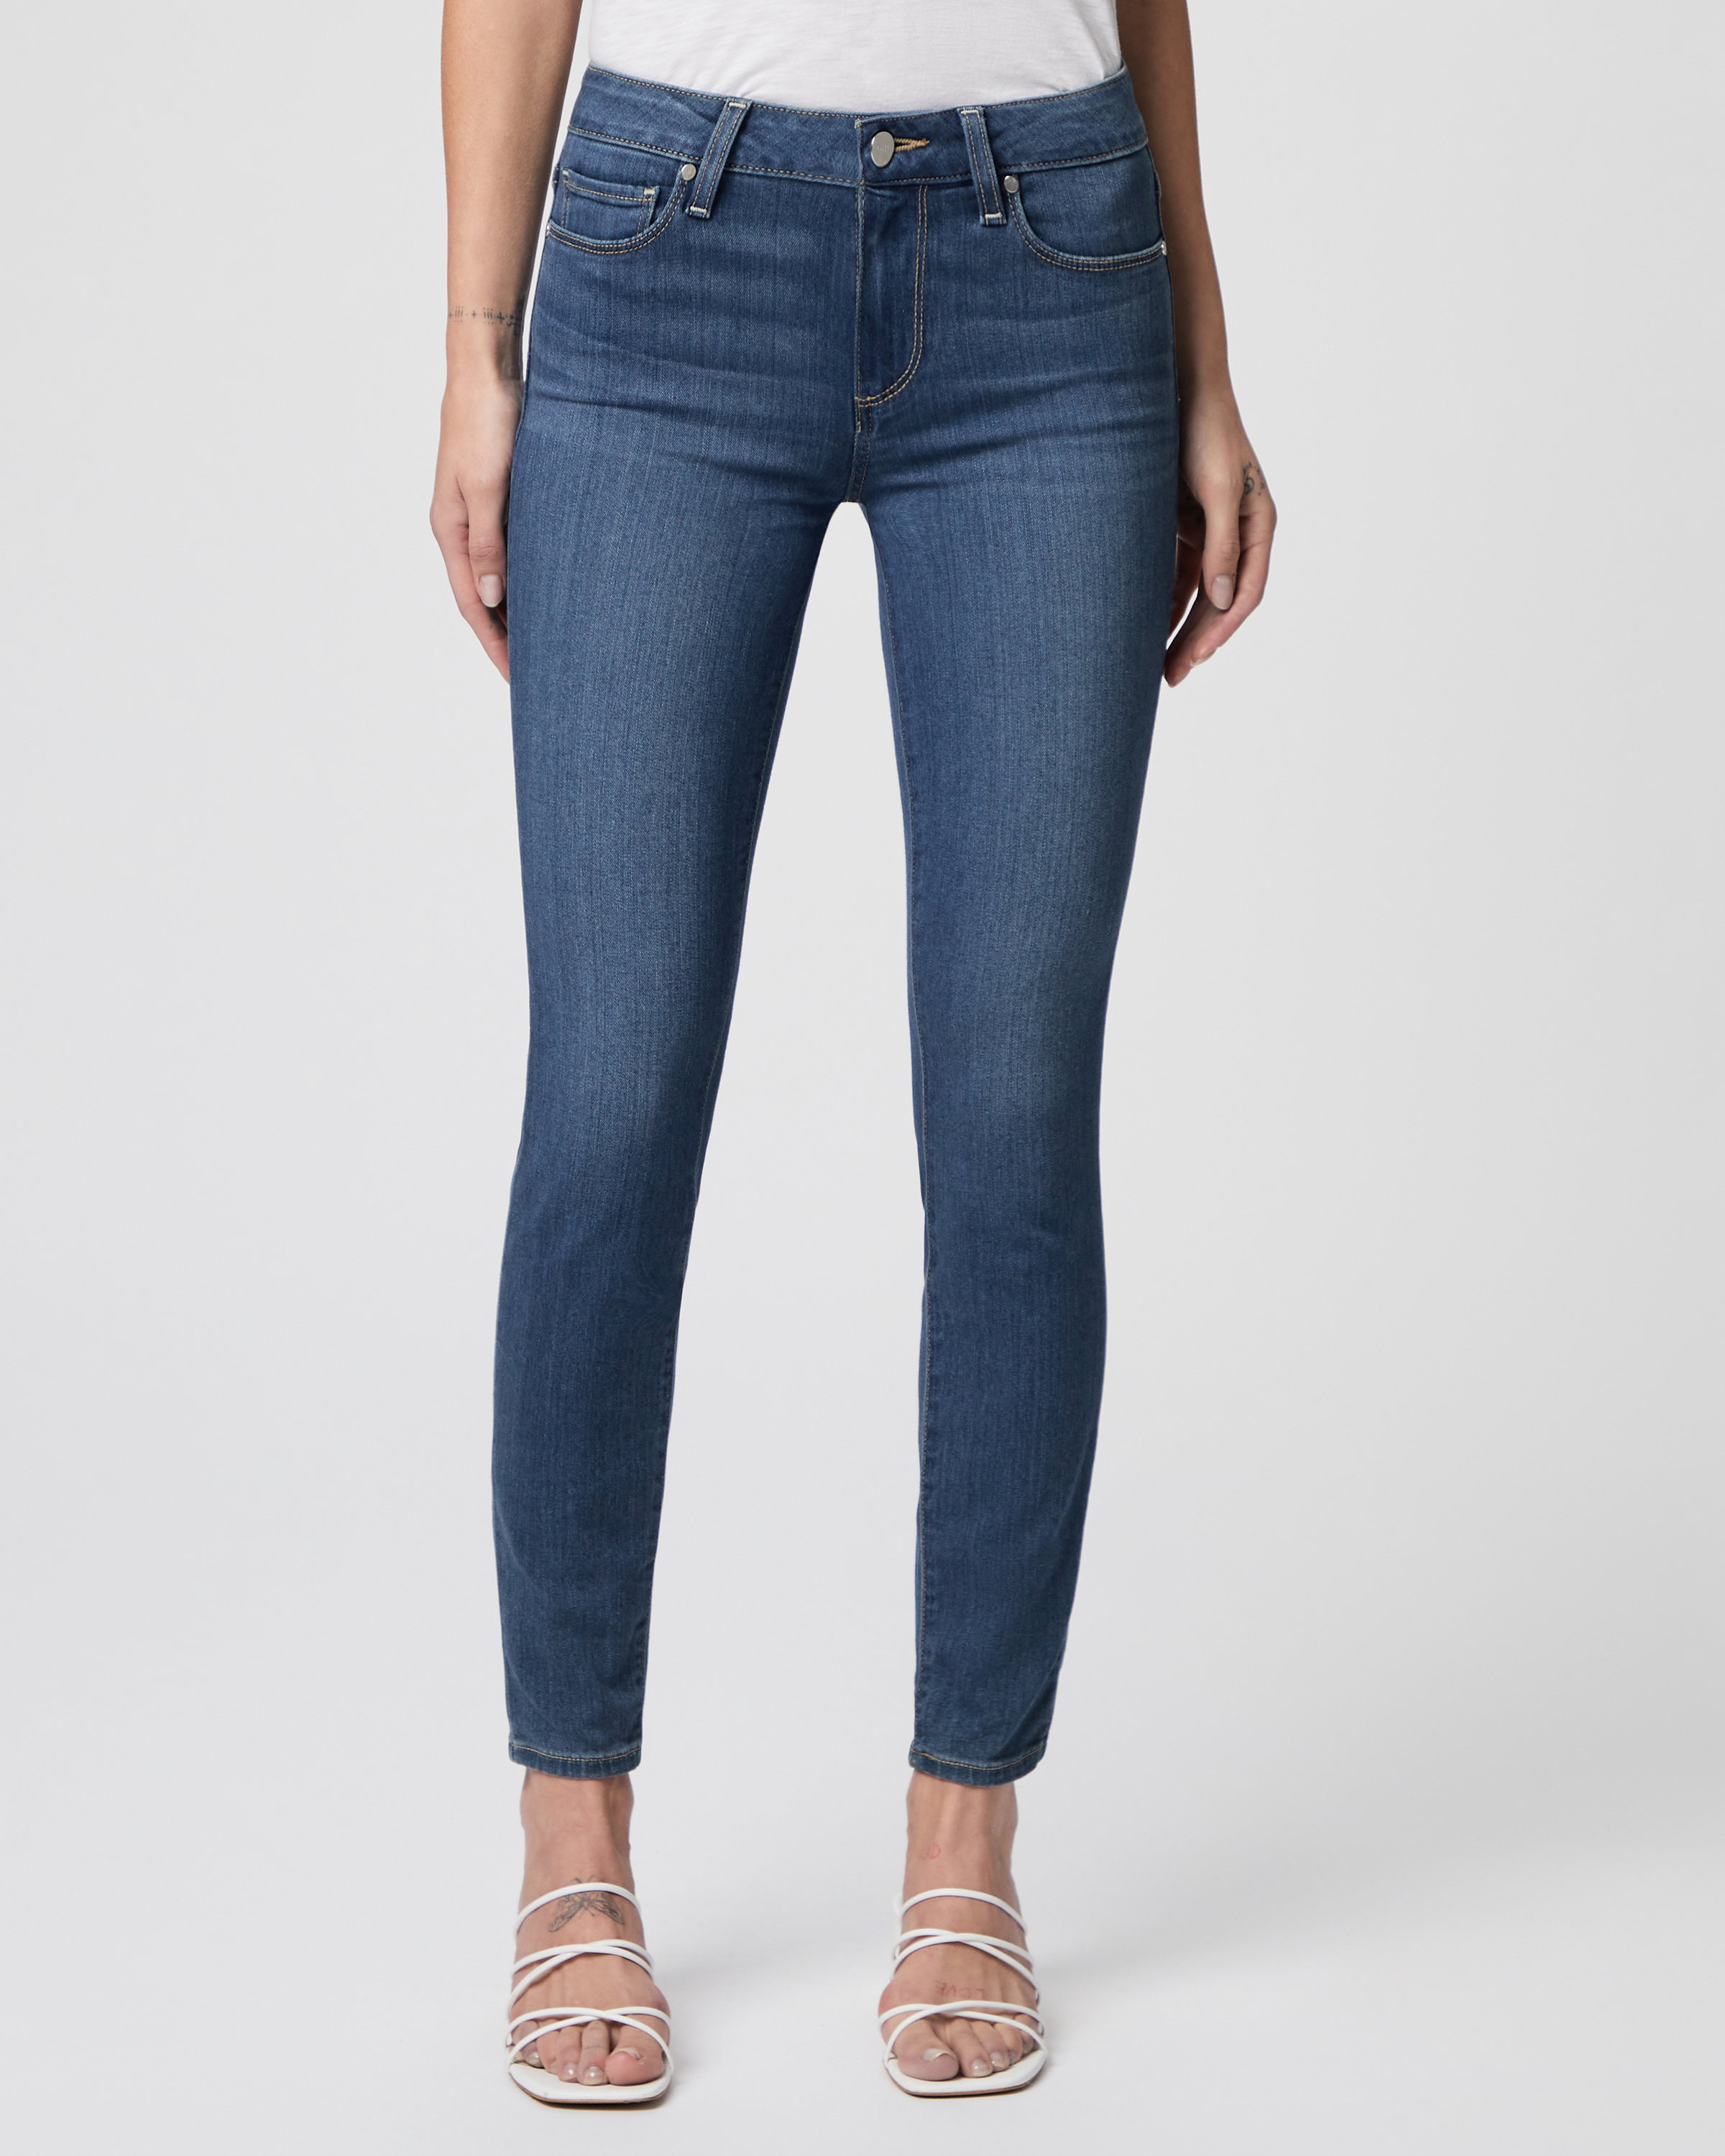 PAIGE Verdugo Ankle Skinny Jeans in Gilmore Maternity Size 32 